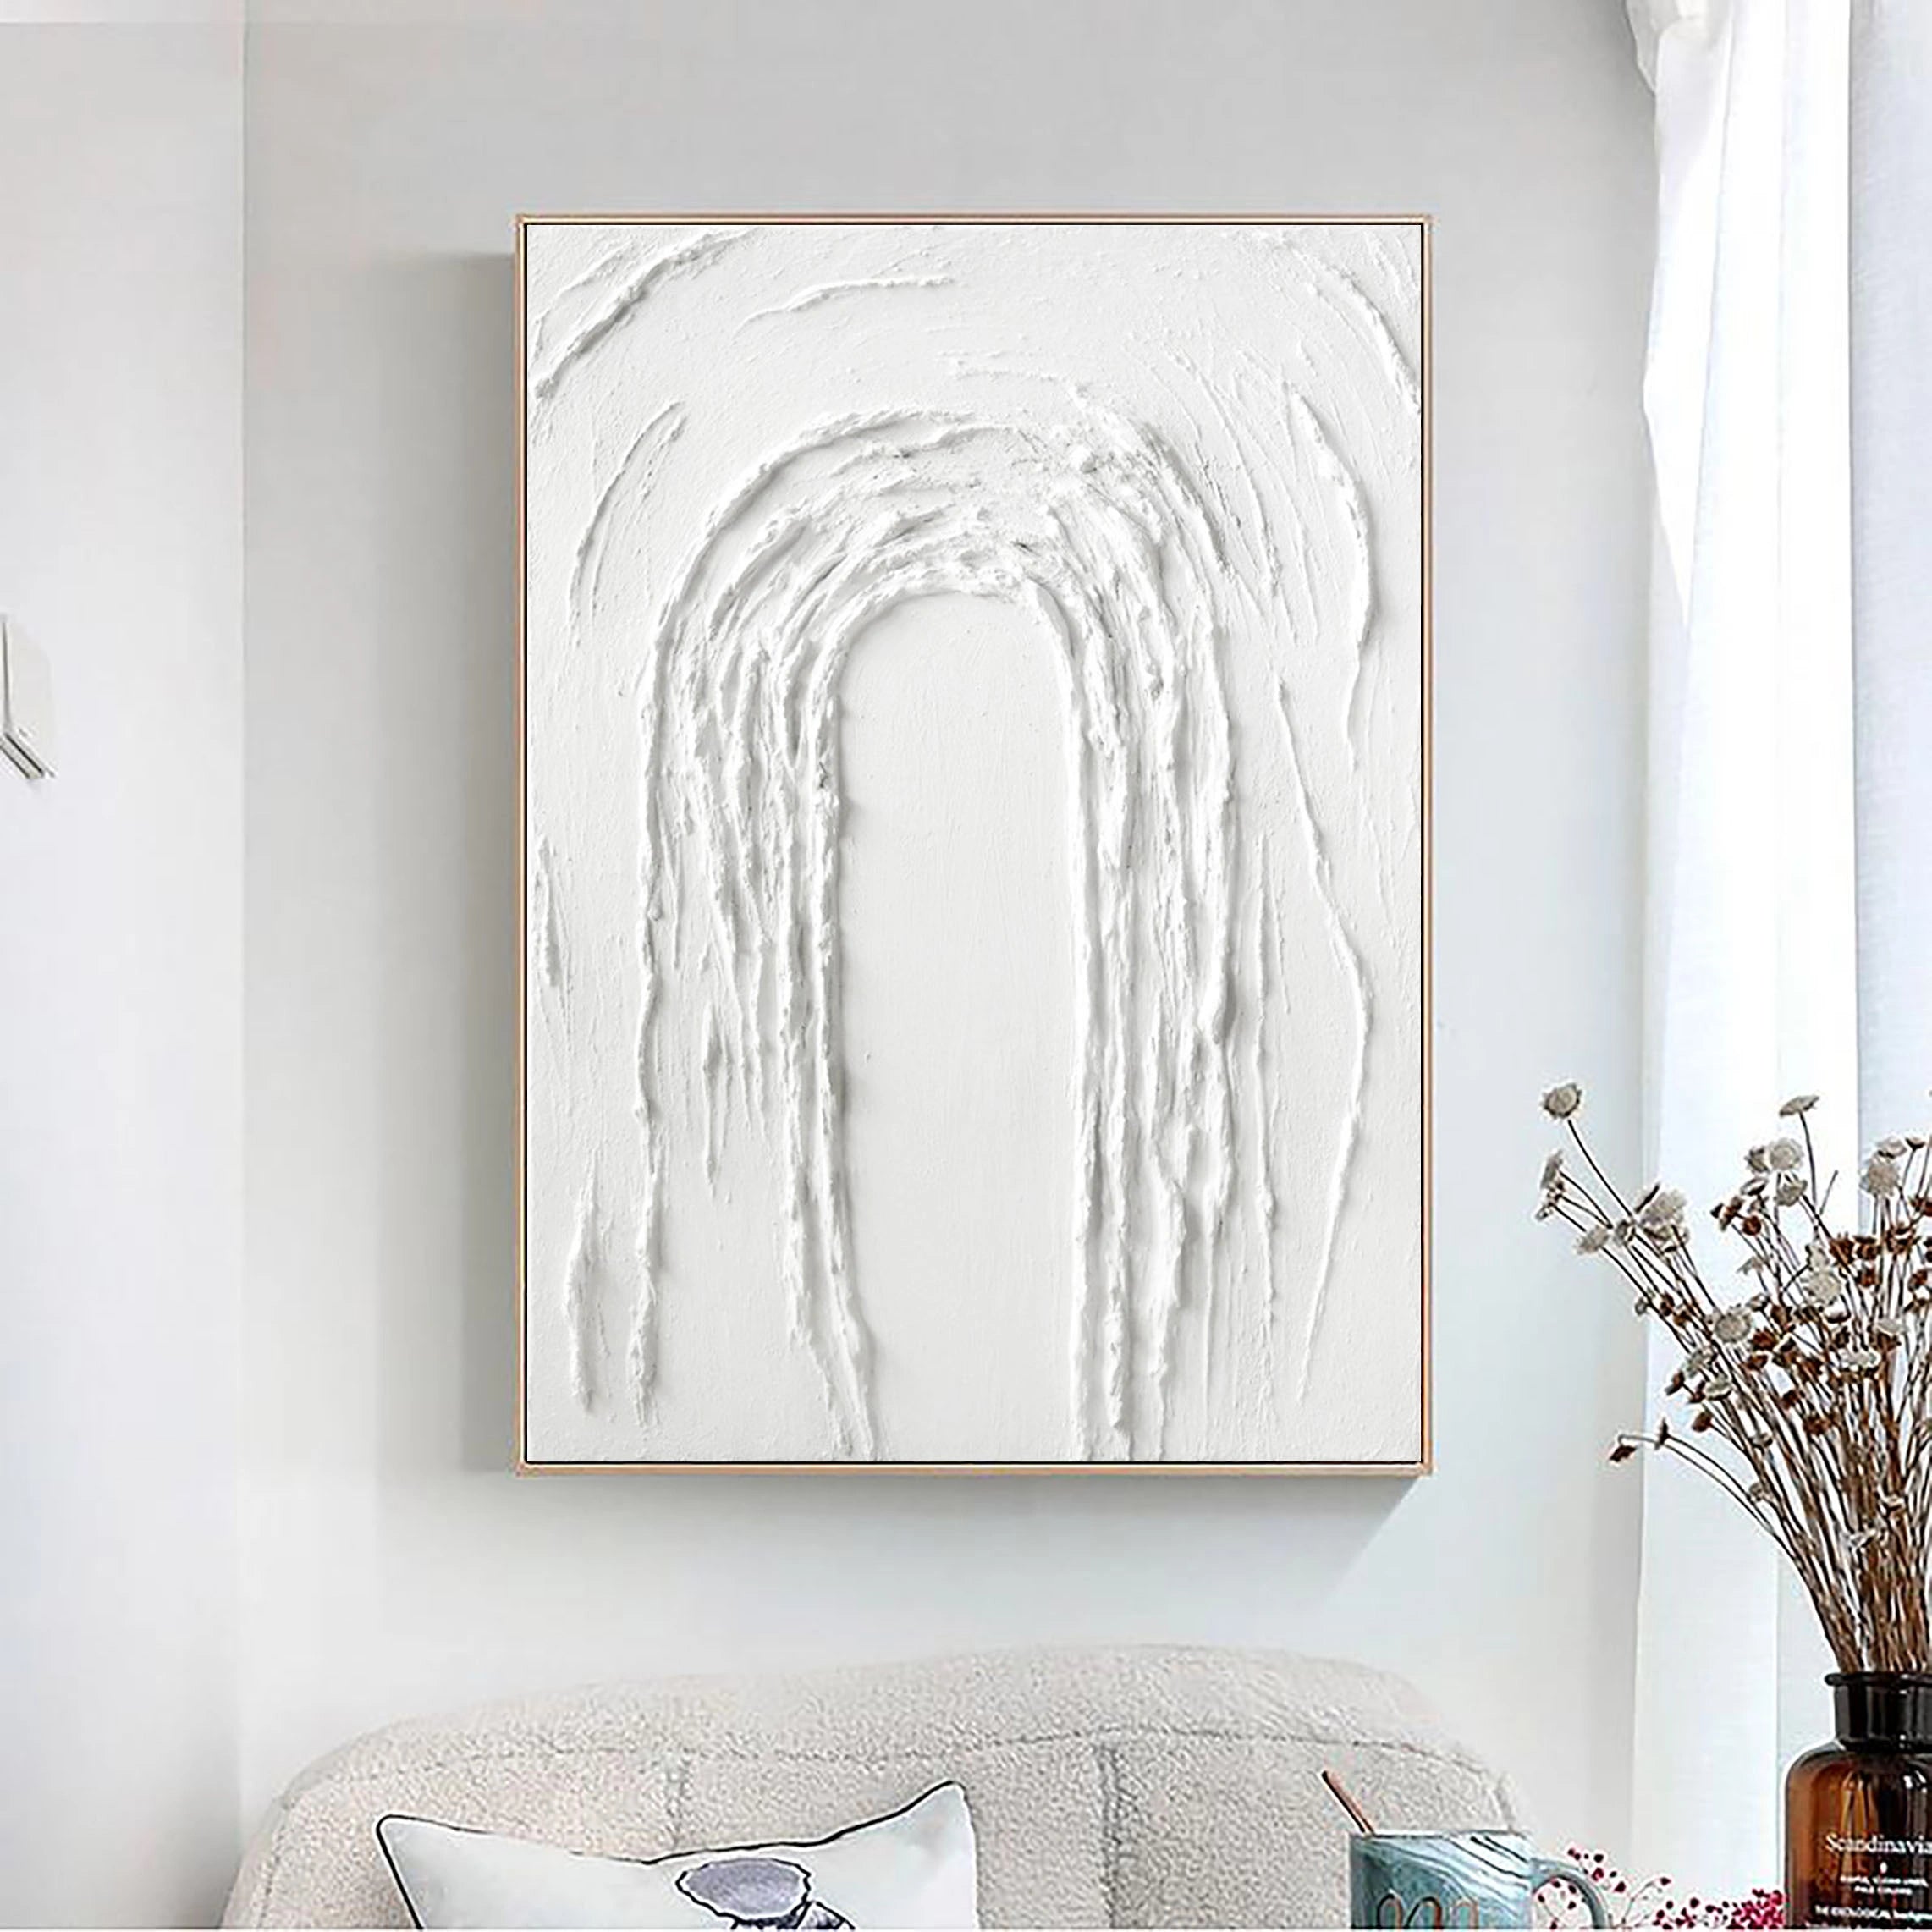 White Textured Plaster Large Painting on Canvas Handcrafted Room Decor